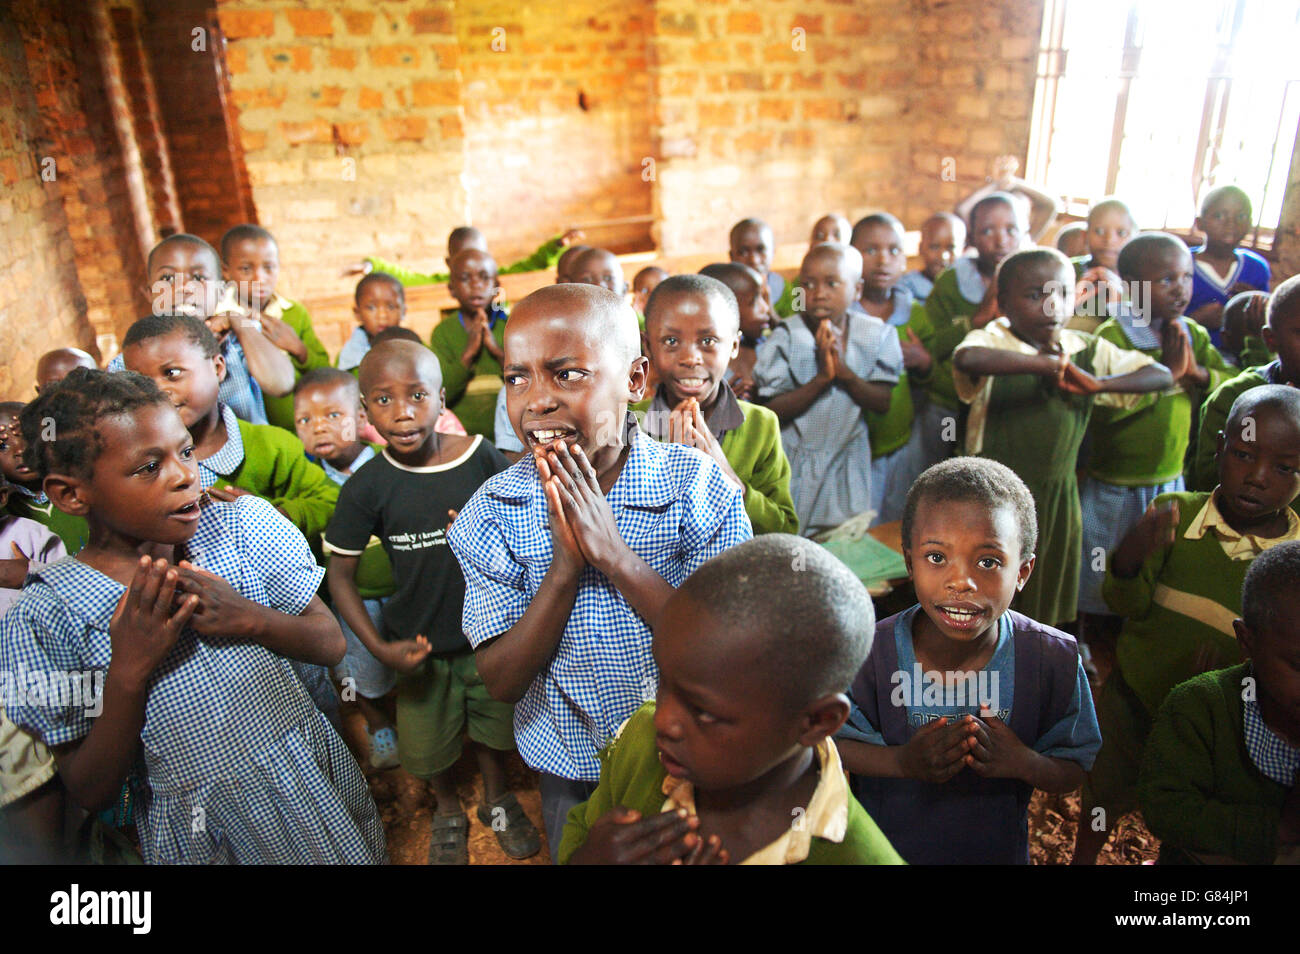 Group  of Ugandan school children in a rural African school gather for morning preys, looking focused and anxious Stock Photo